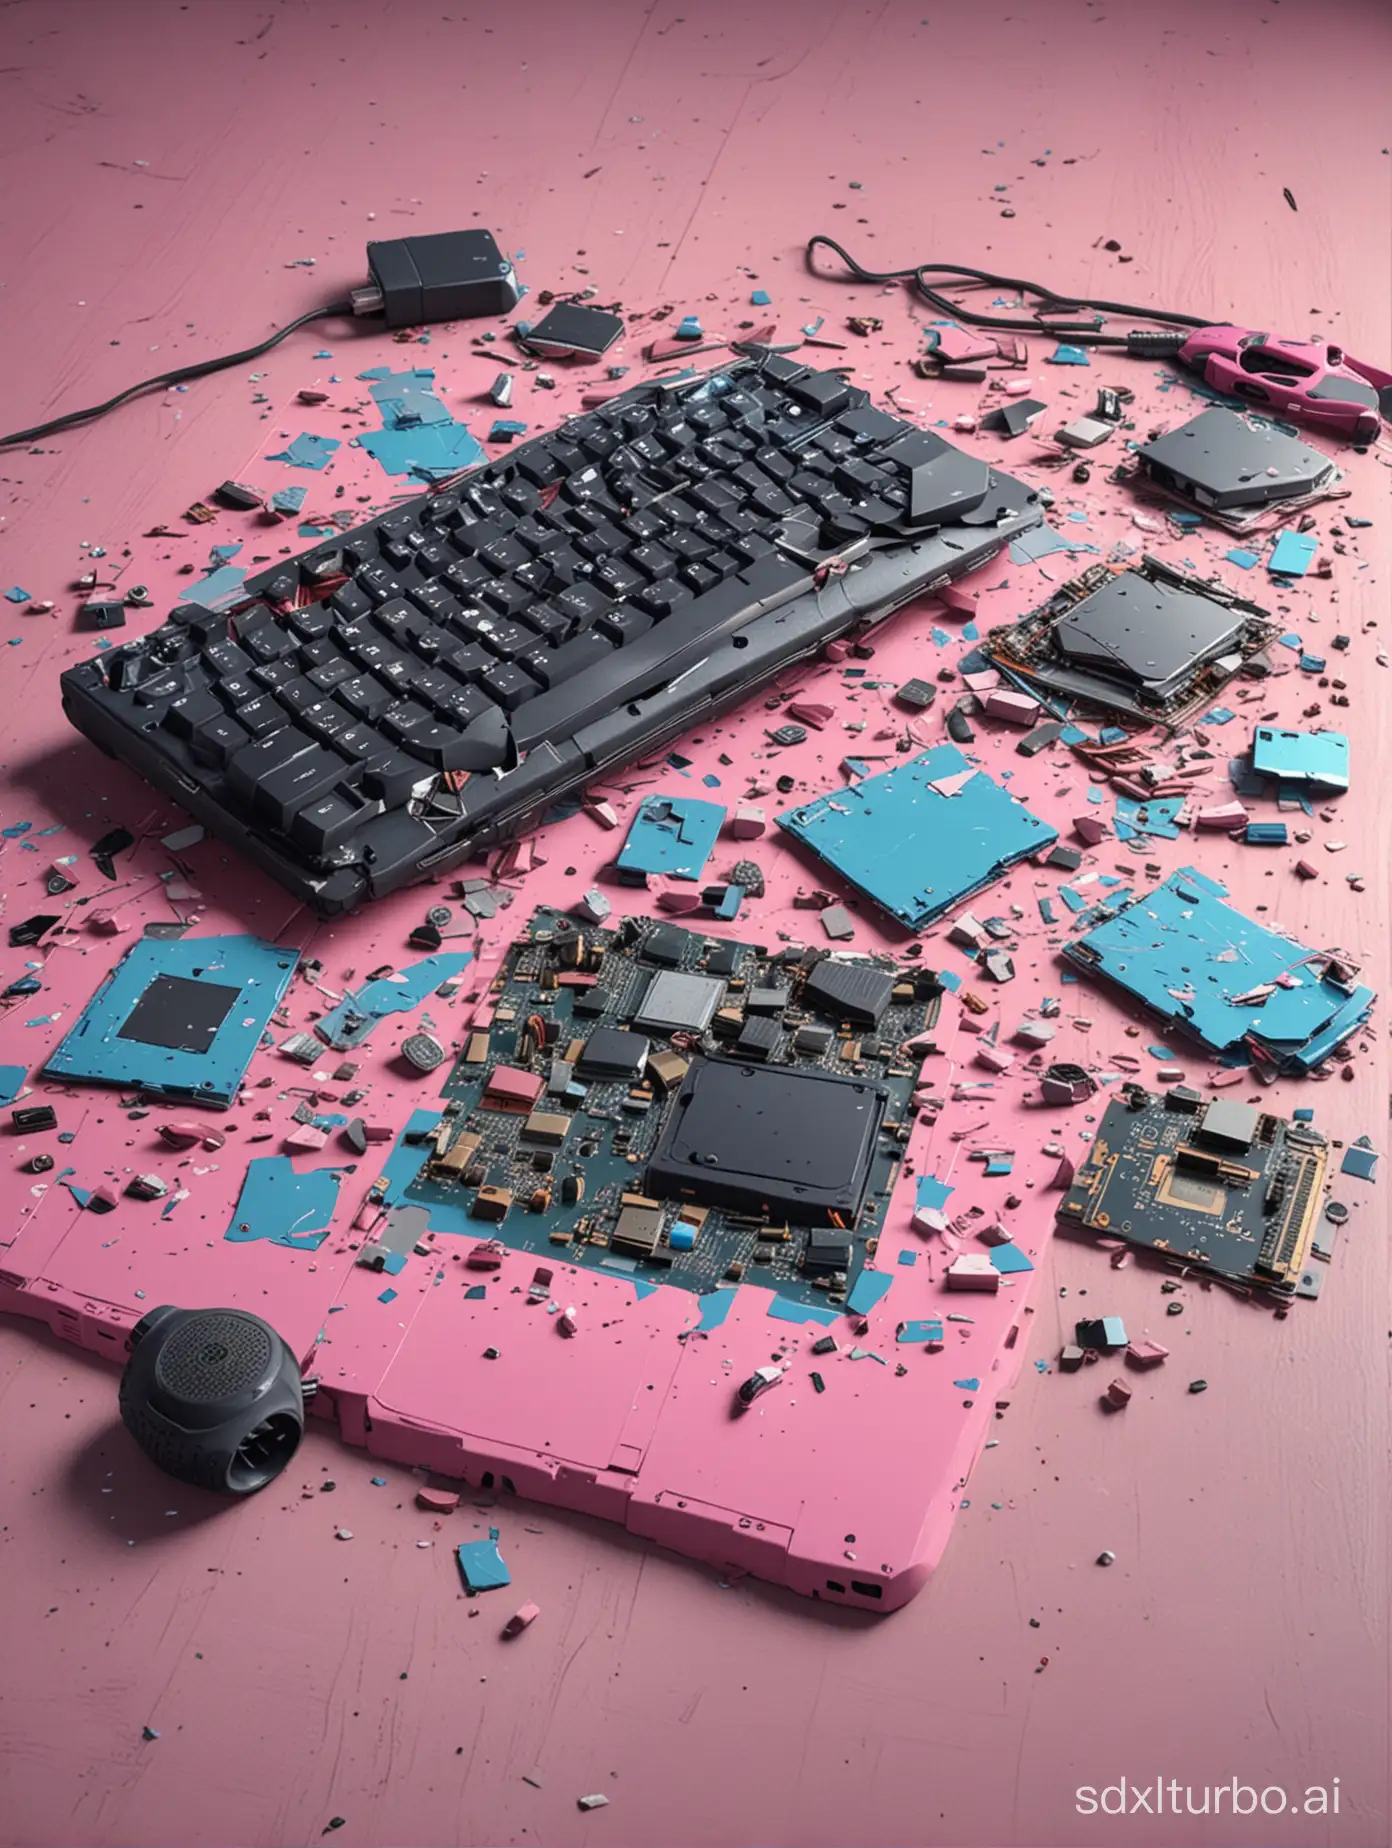 UltraRealistic-Photo-of-a-Malfunctioning-Computer-with-Pink-and-Blue-Aesthetic-on-a-Table